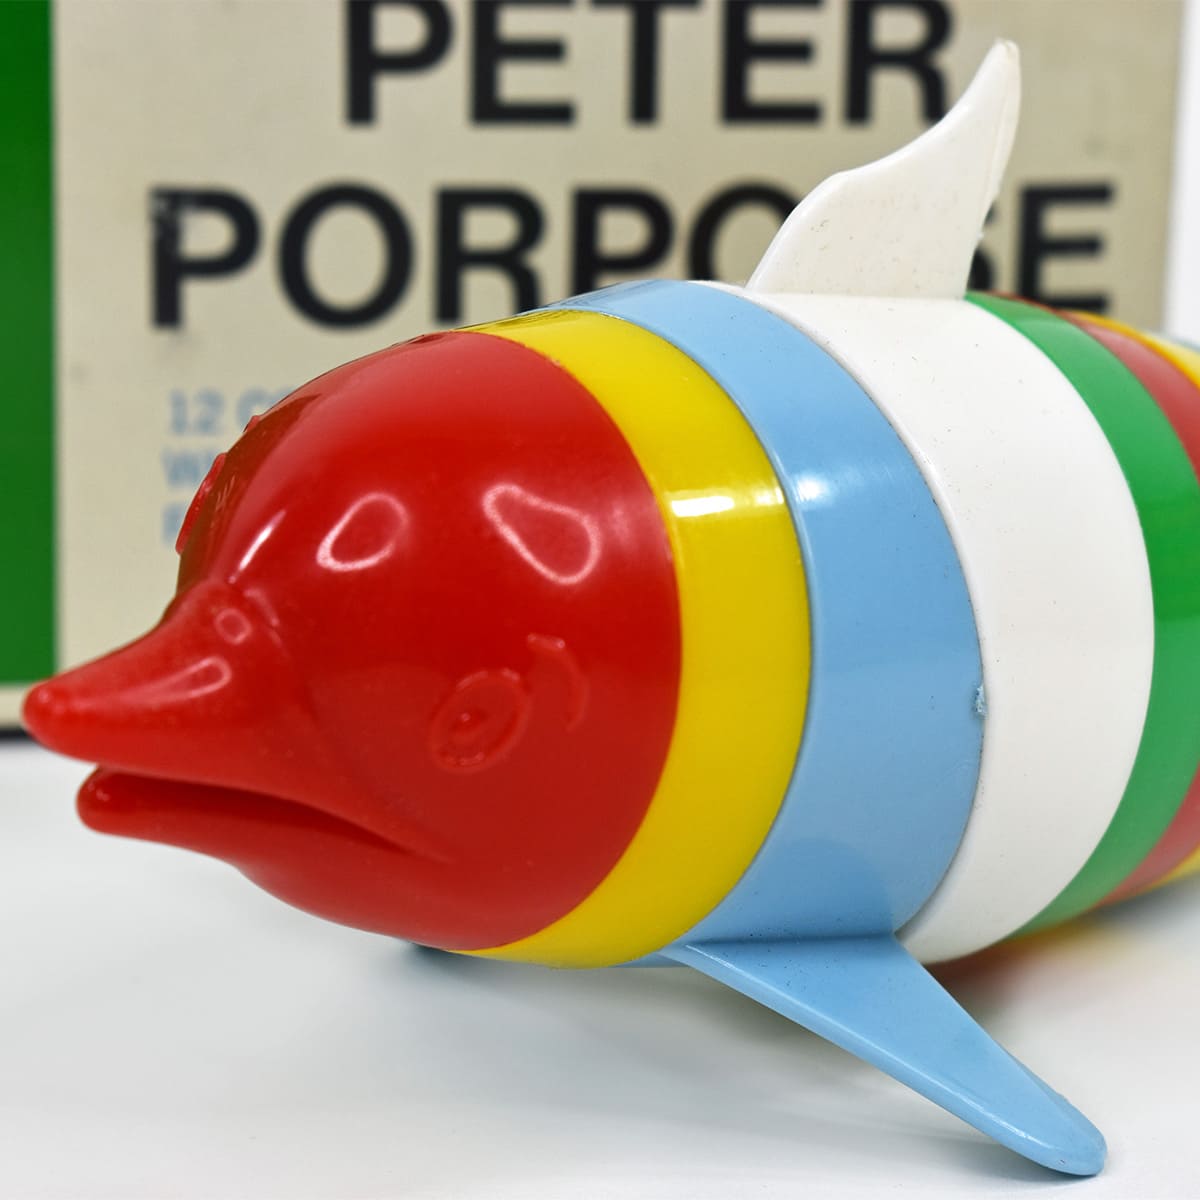 1970s Peter Porpoise Puzzle Vintage Toy by Child Guidance Toys